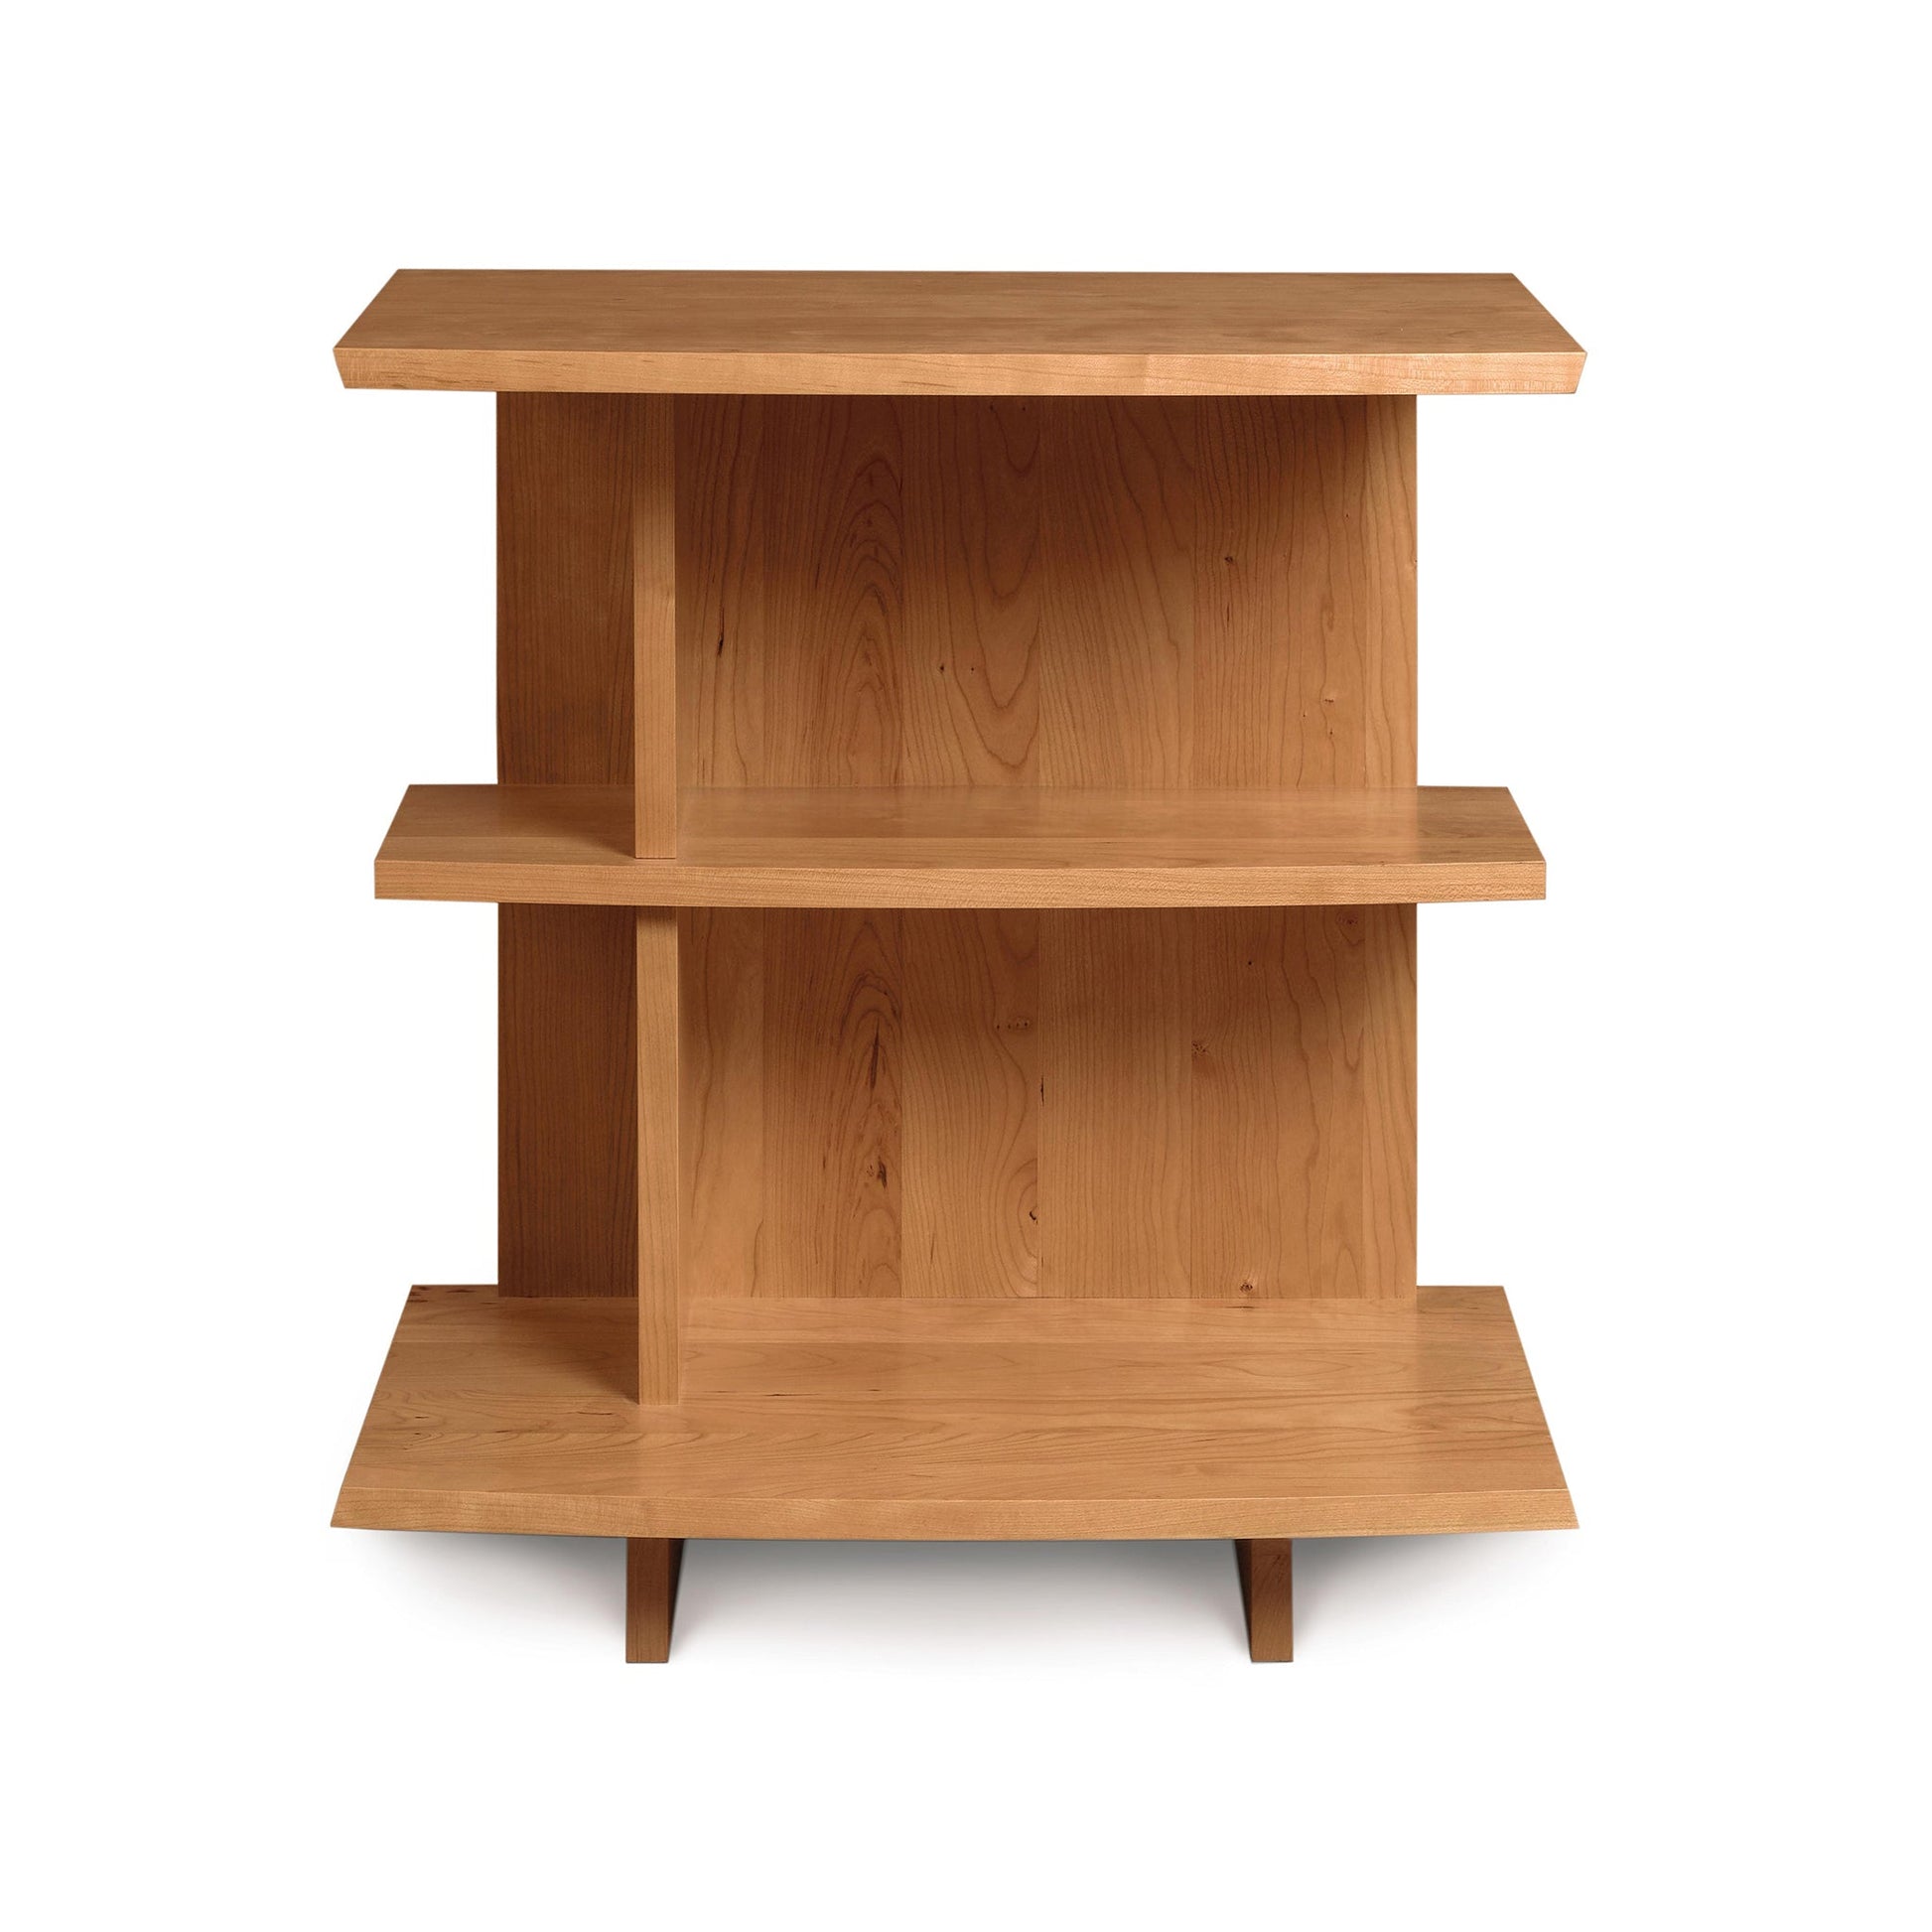 A wooden shelf with two shelves on it.